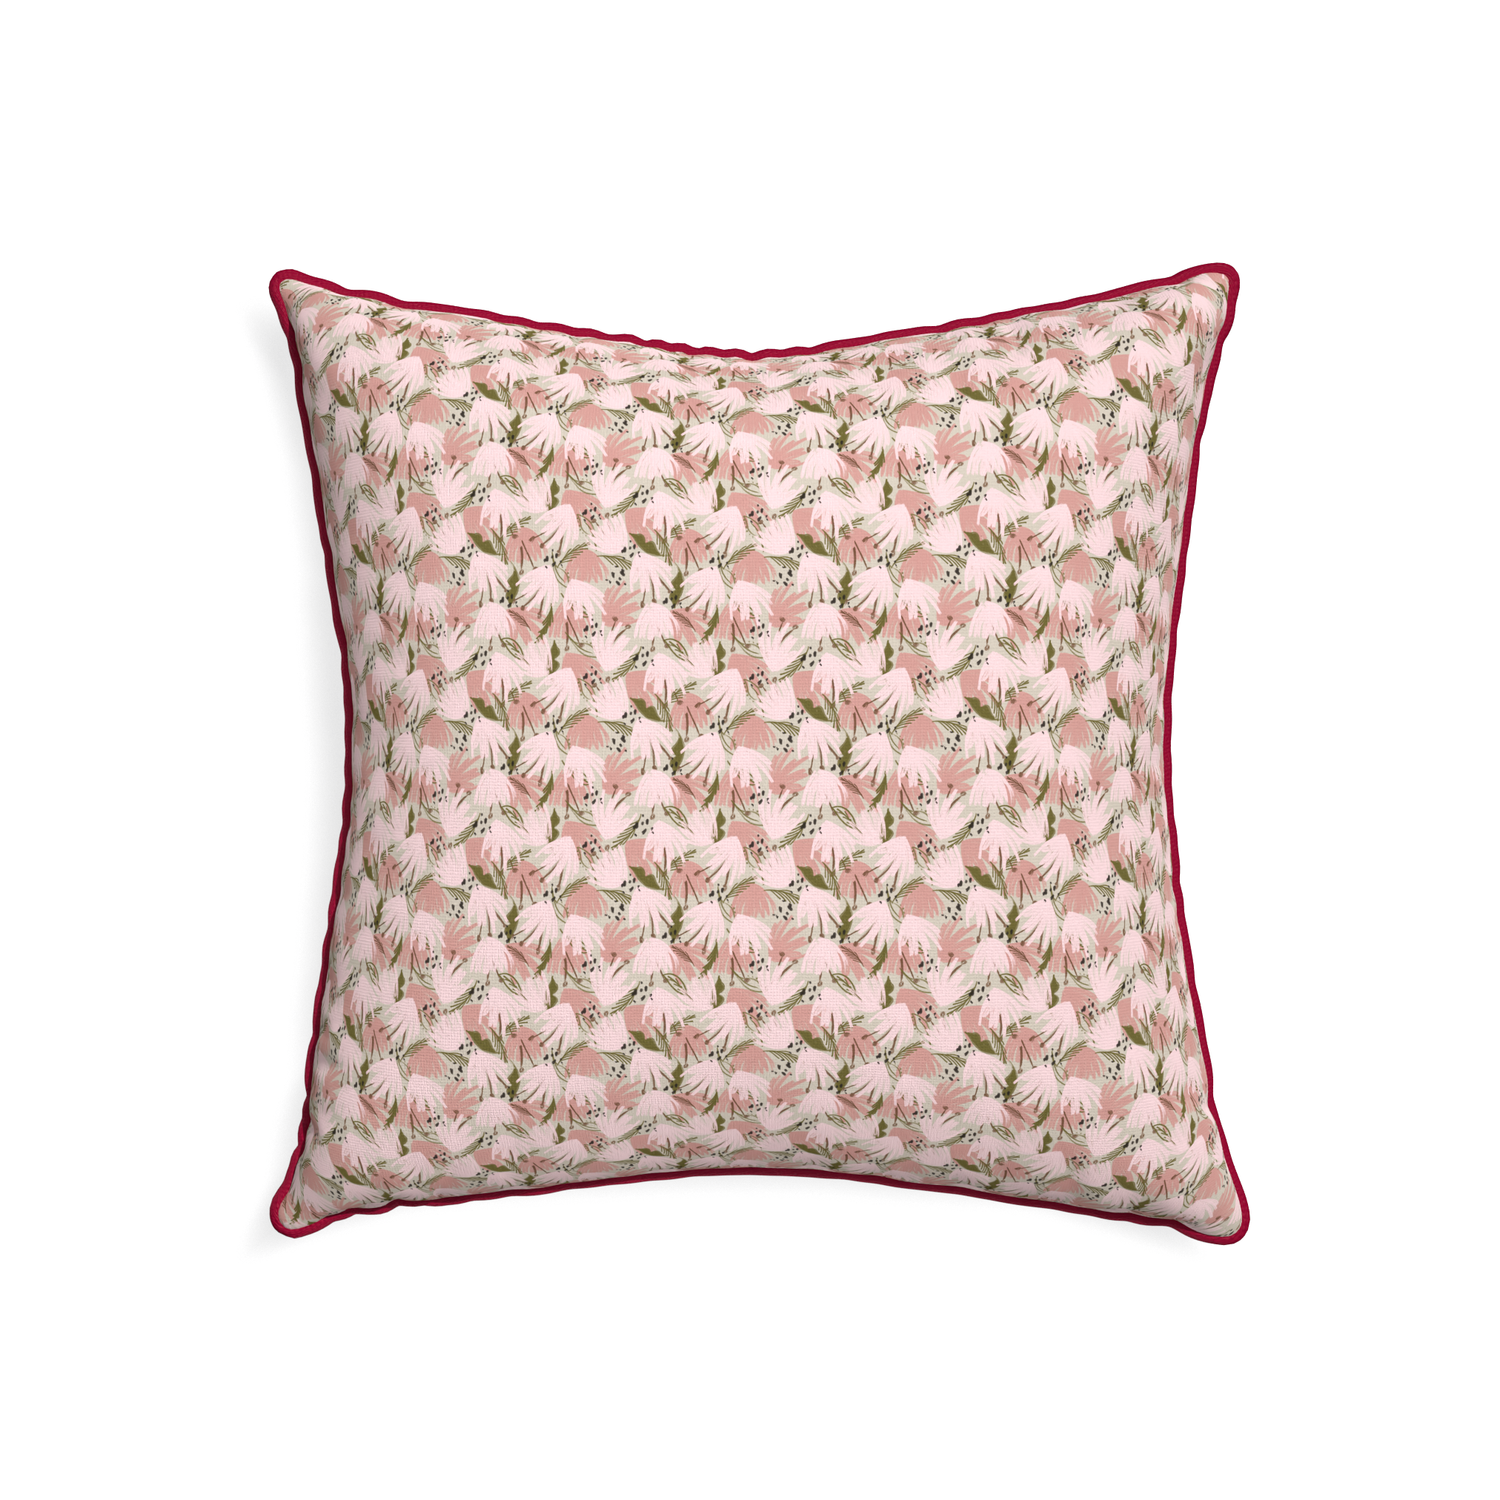 22-square eden pink custom pillow with raspberry piping on white background